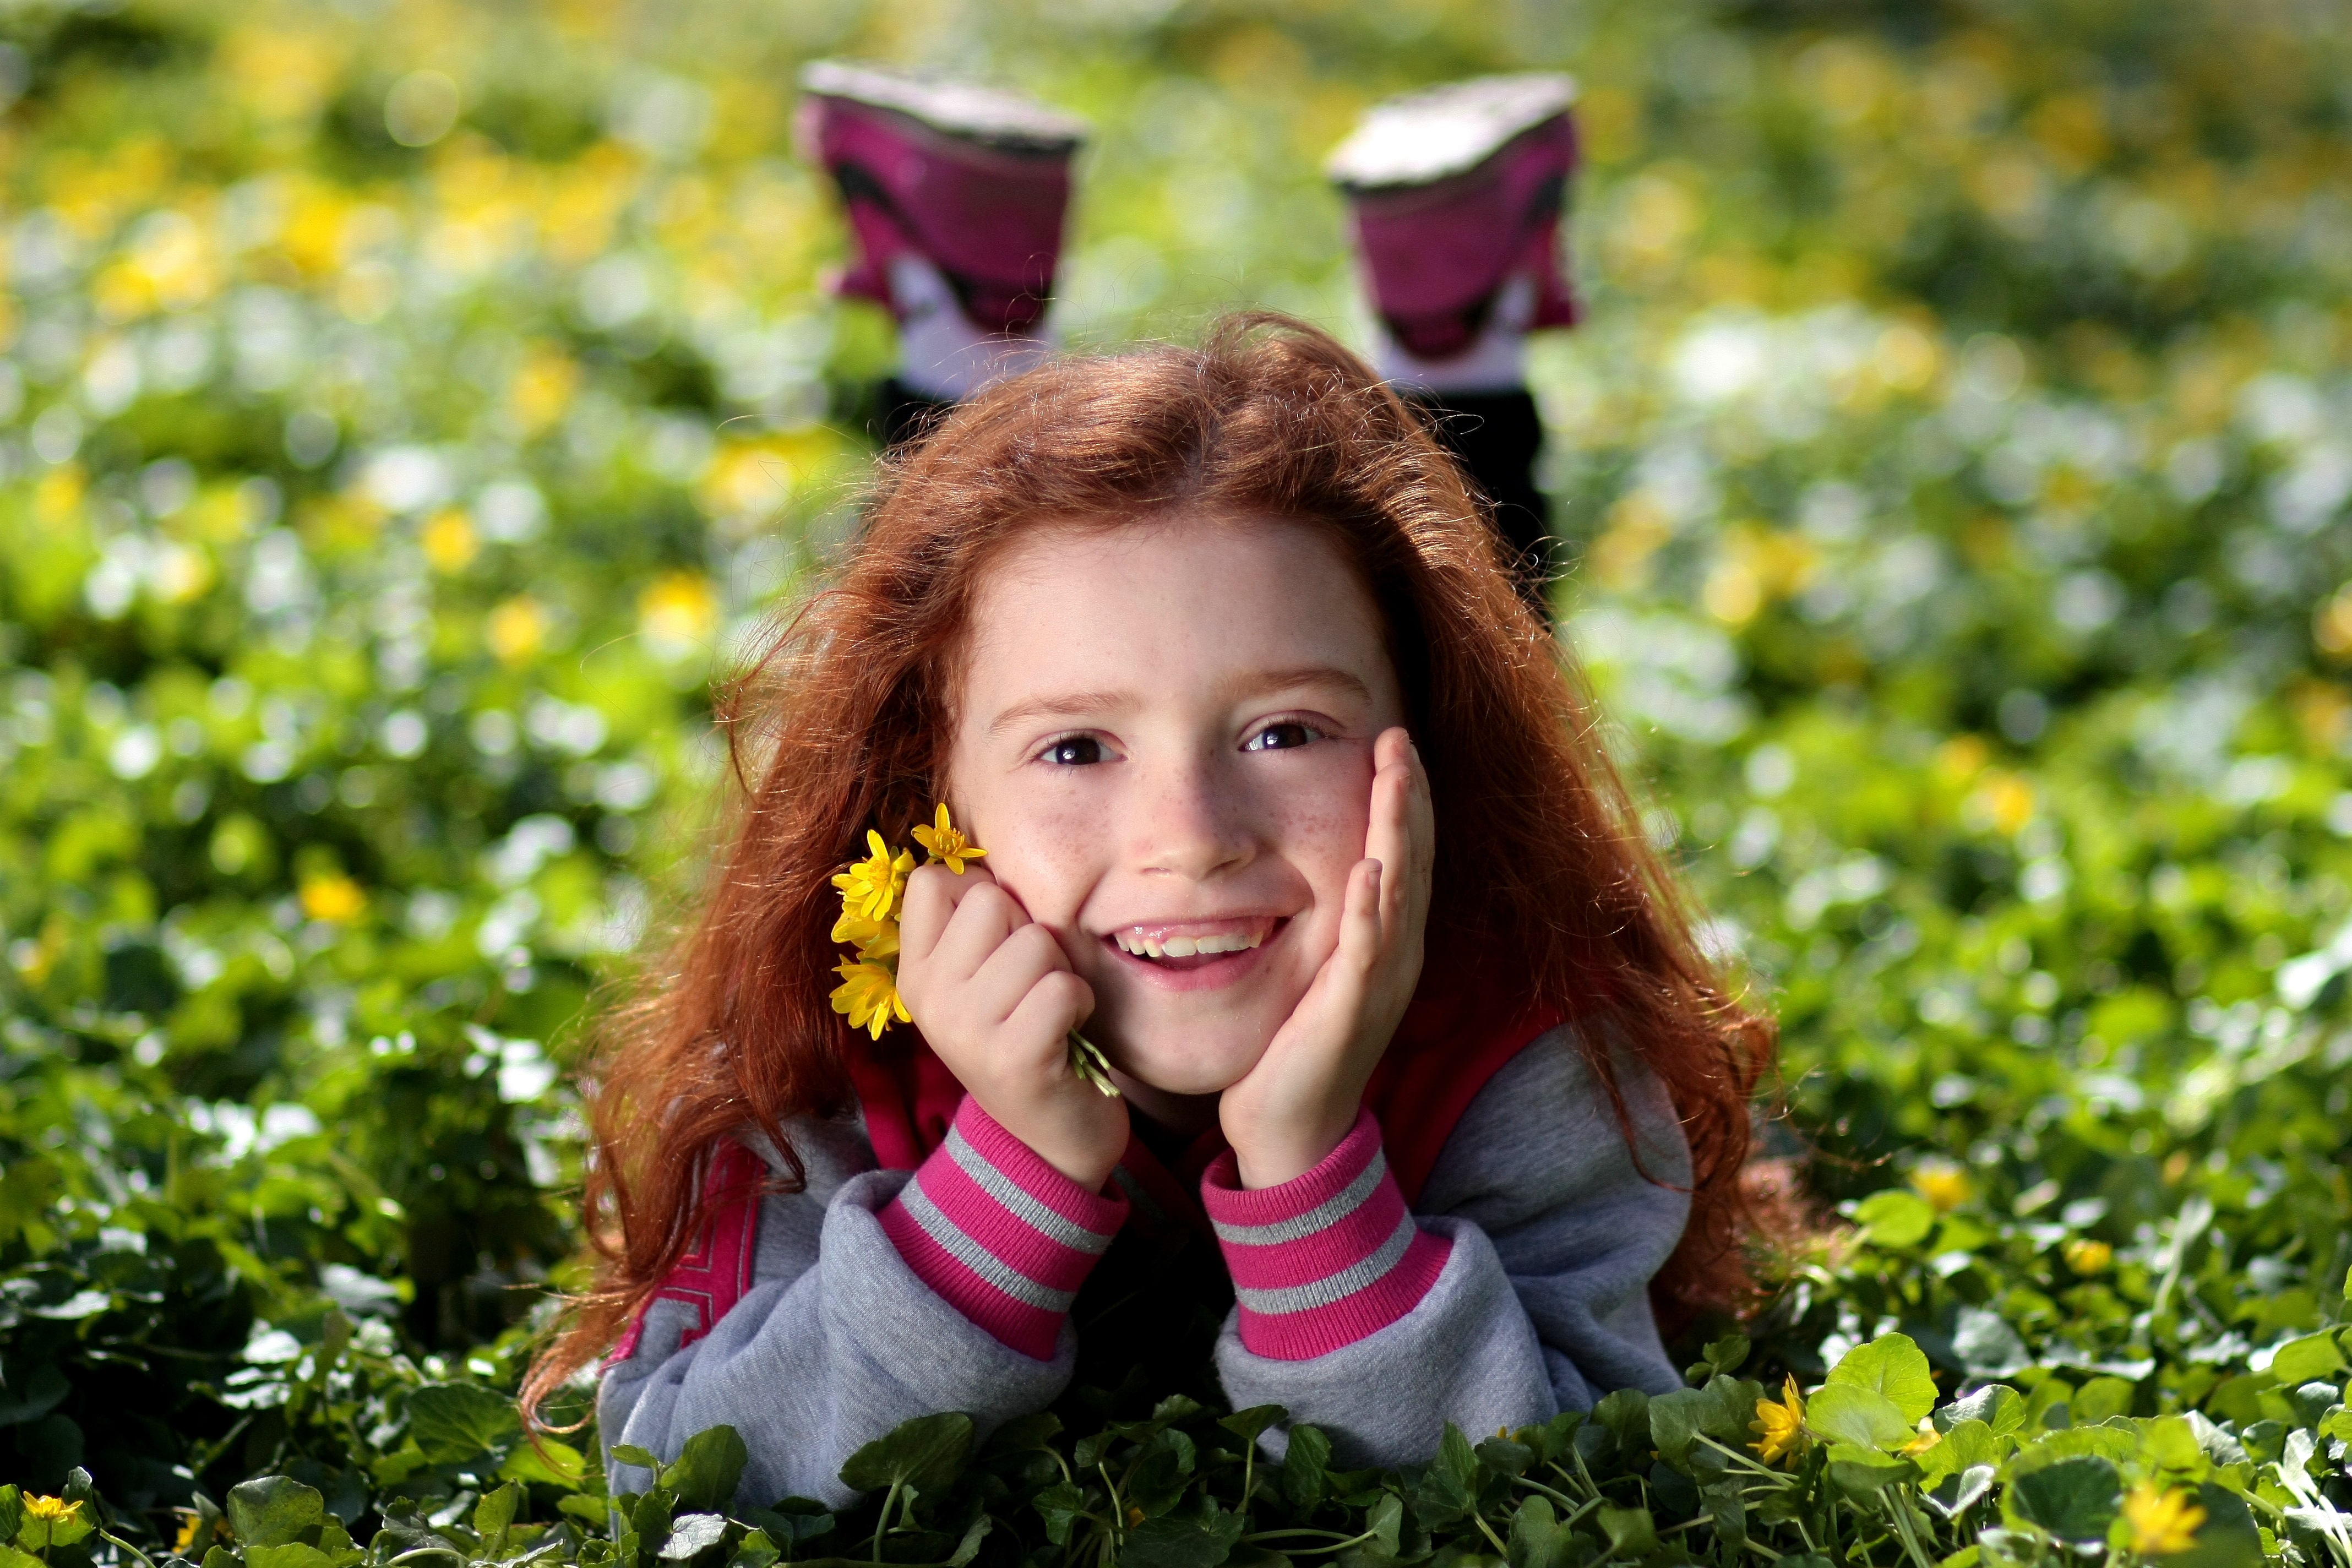 Young girl smiling in a field of flowers.